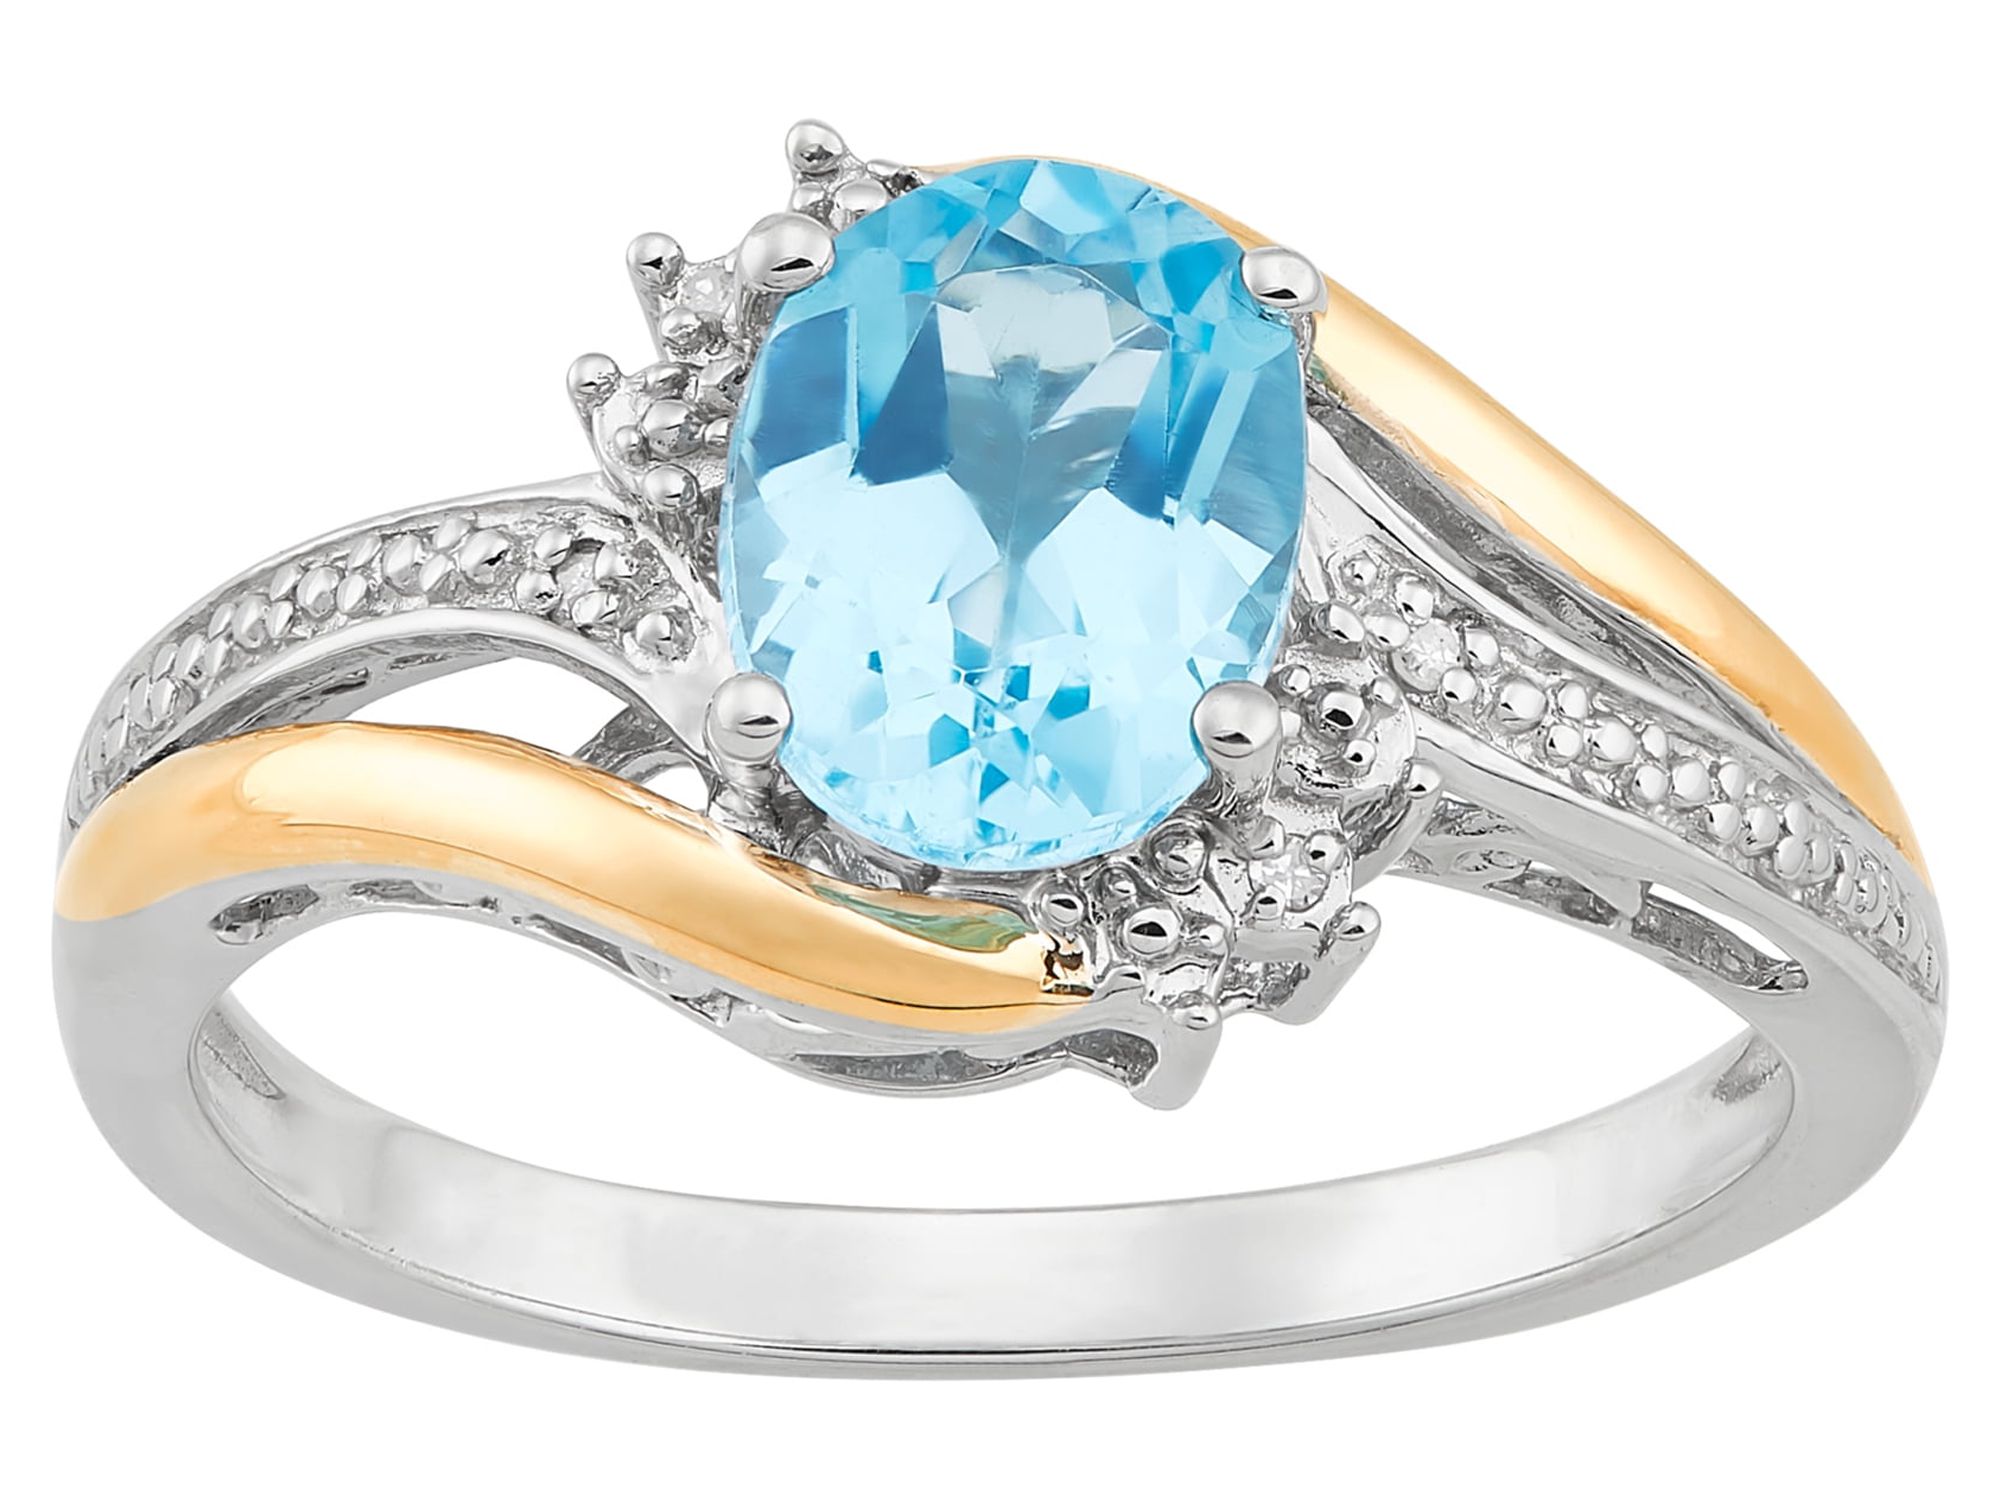 Brilliance Fine Jewelry Genuine Blue Topaz Diamond Accent Ring in Sterling Silver and 10K Yellow Gold - image 1 of 4